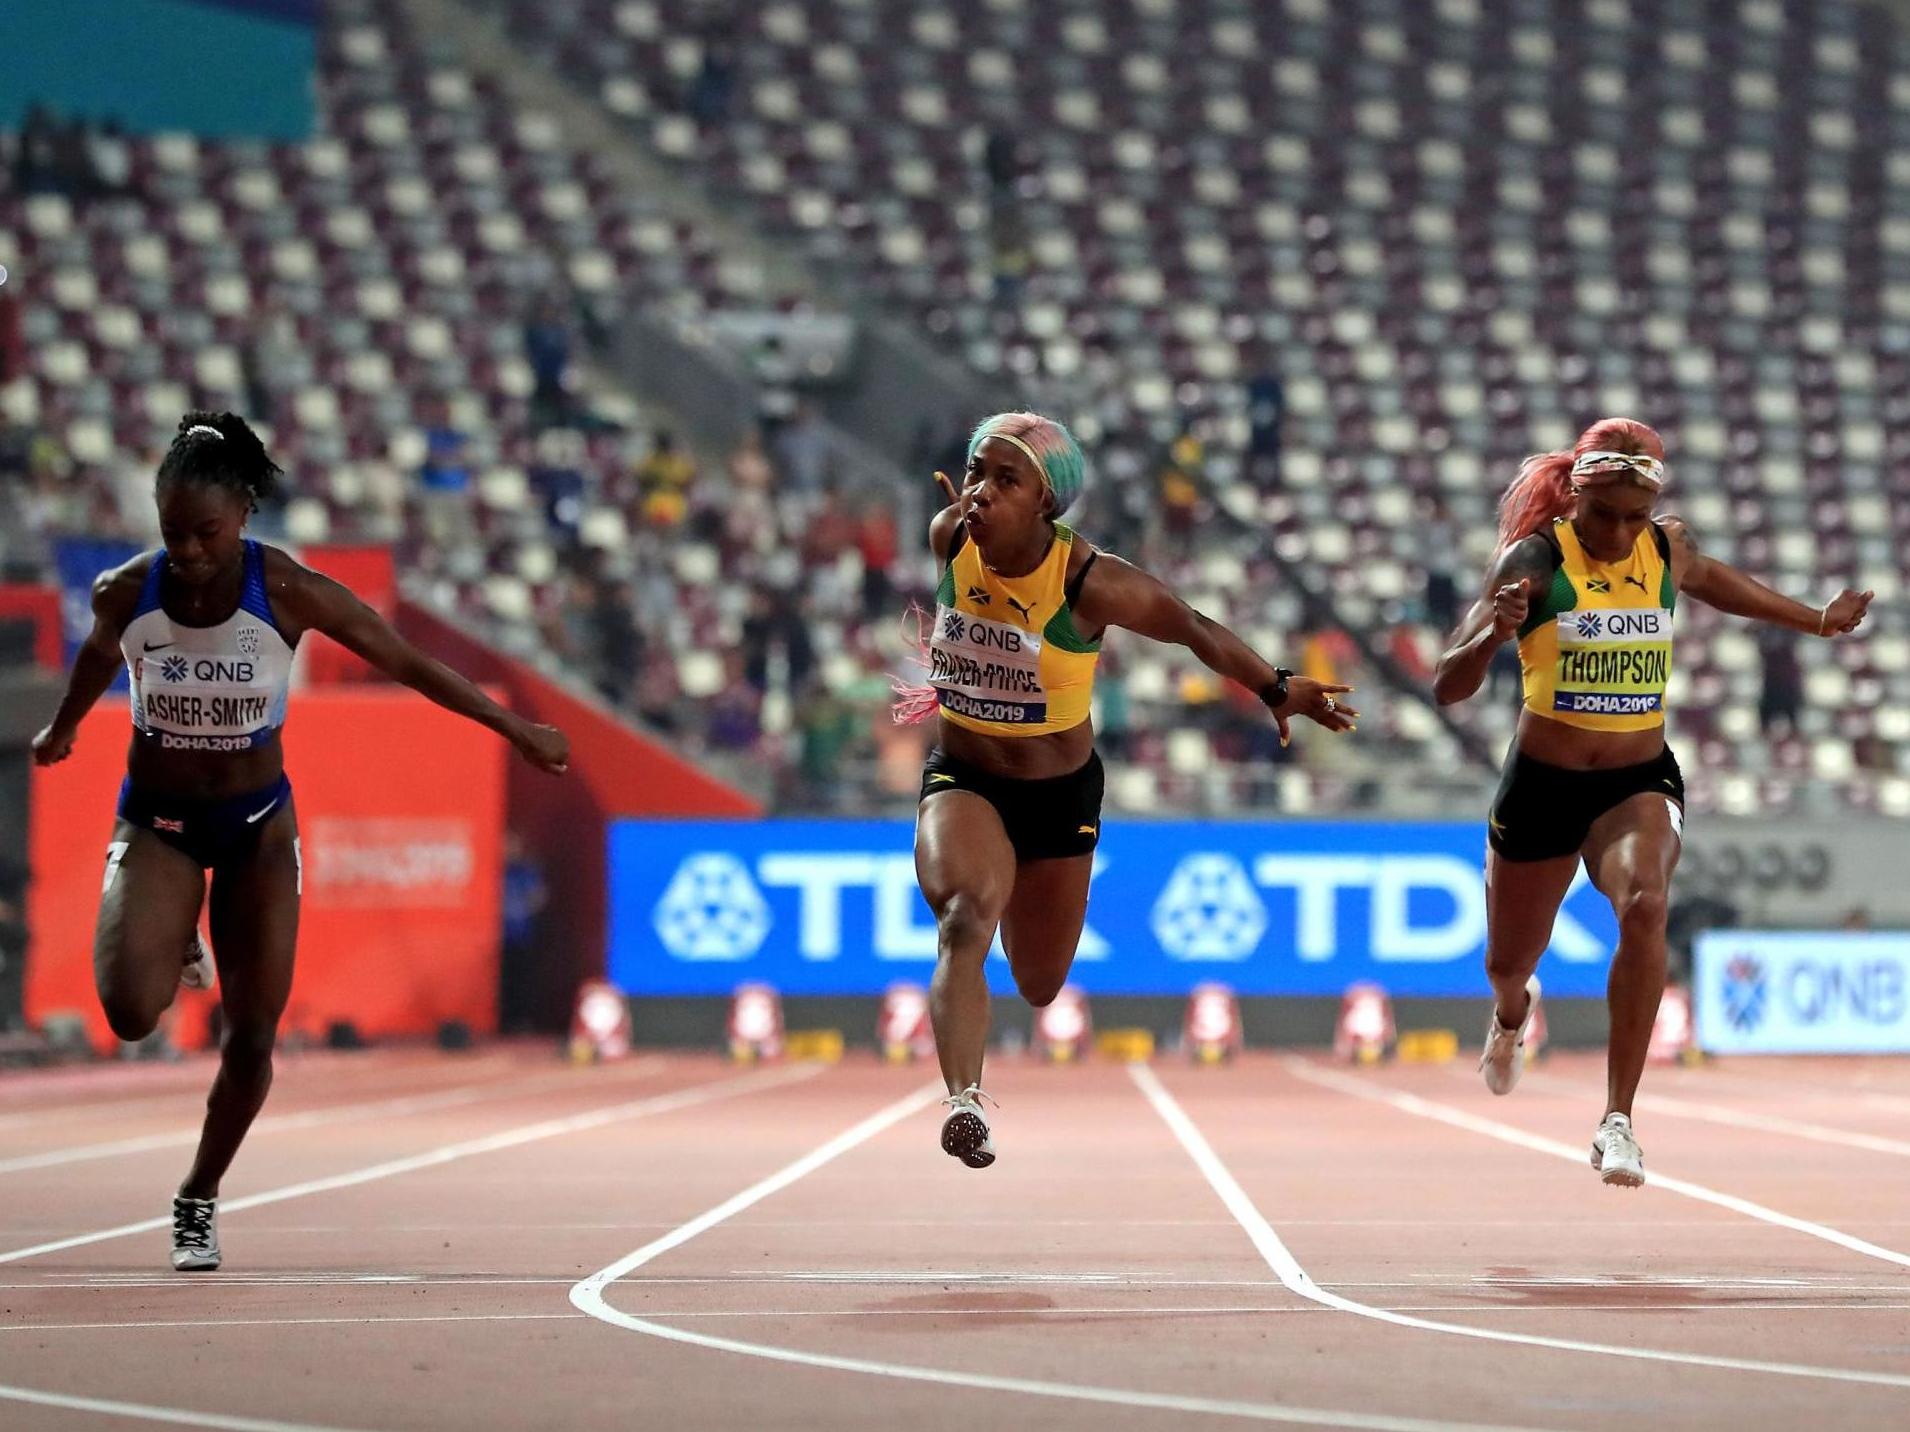 Shelly-Ann Fraser-Pryce wins the women’s 100m in front of an empty crowd in Doha